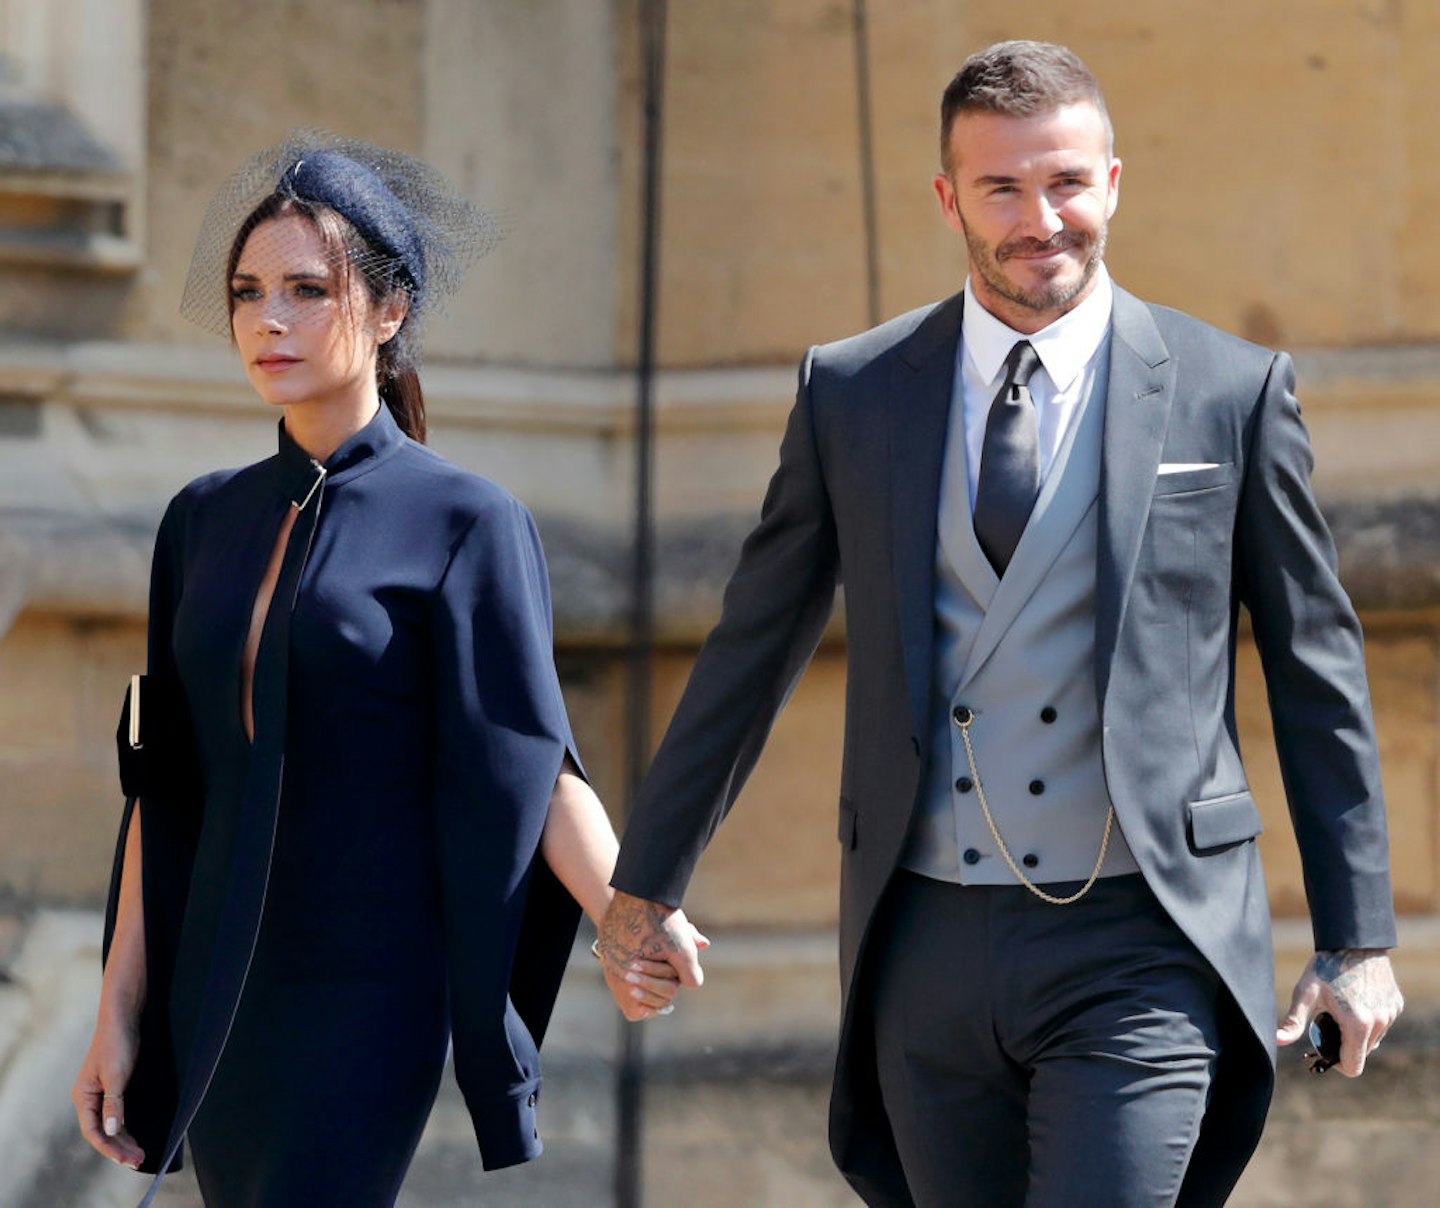 A Look Back At David And Victoria Beckham's Iconic Wedding | Celebrity ...